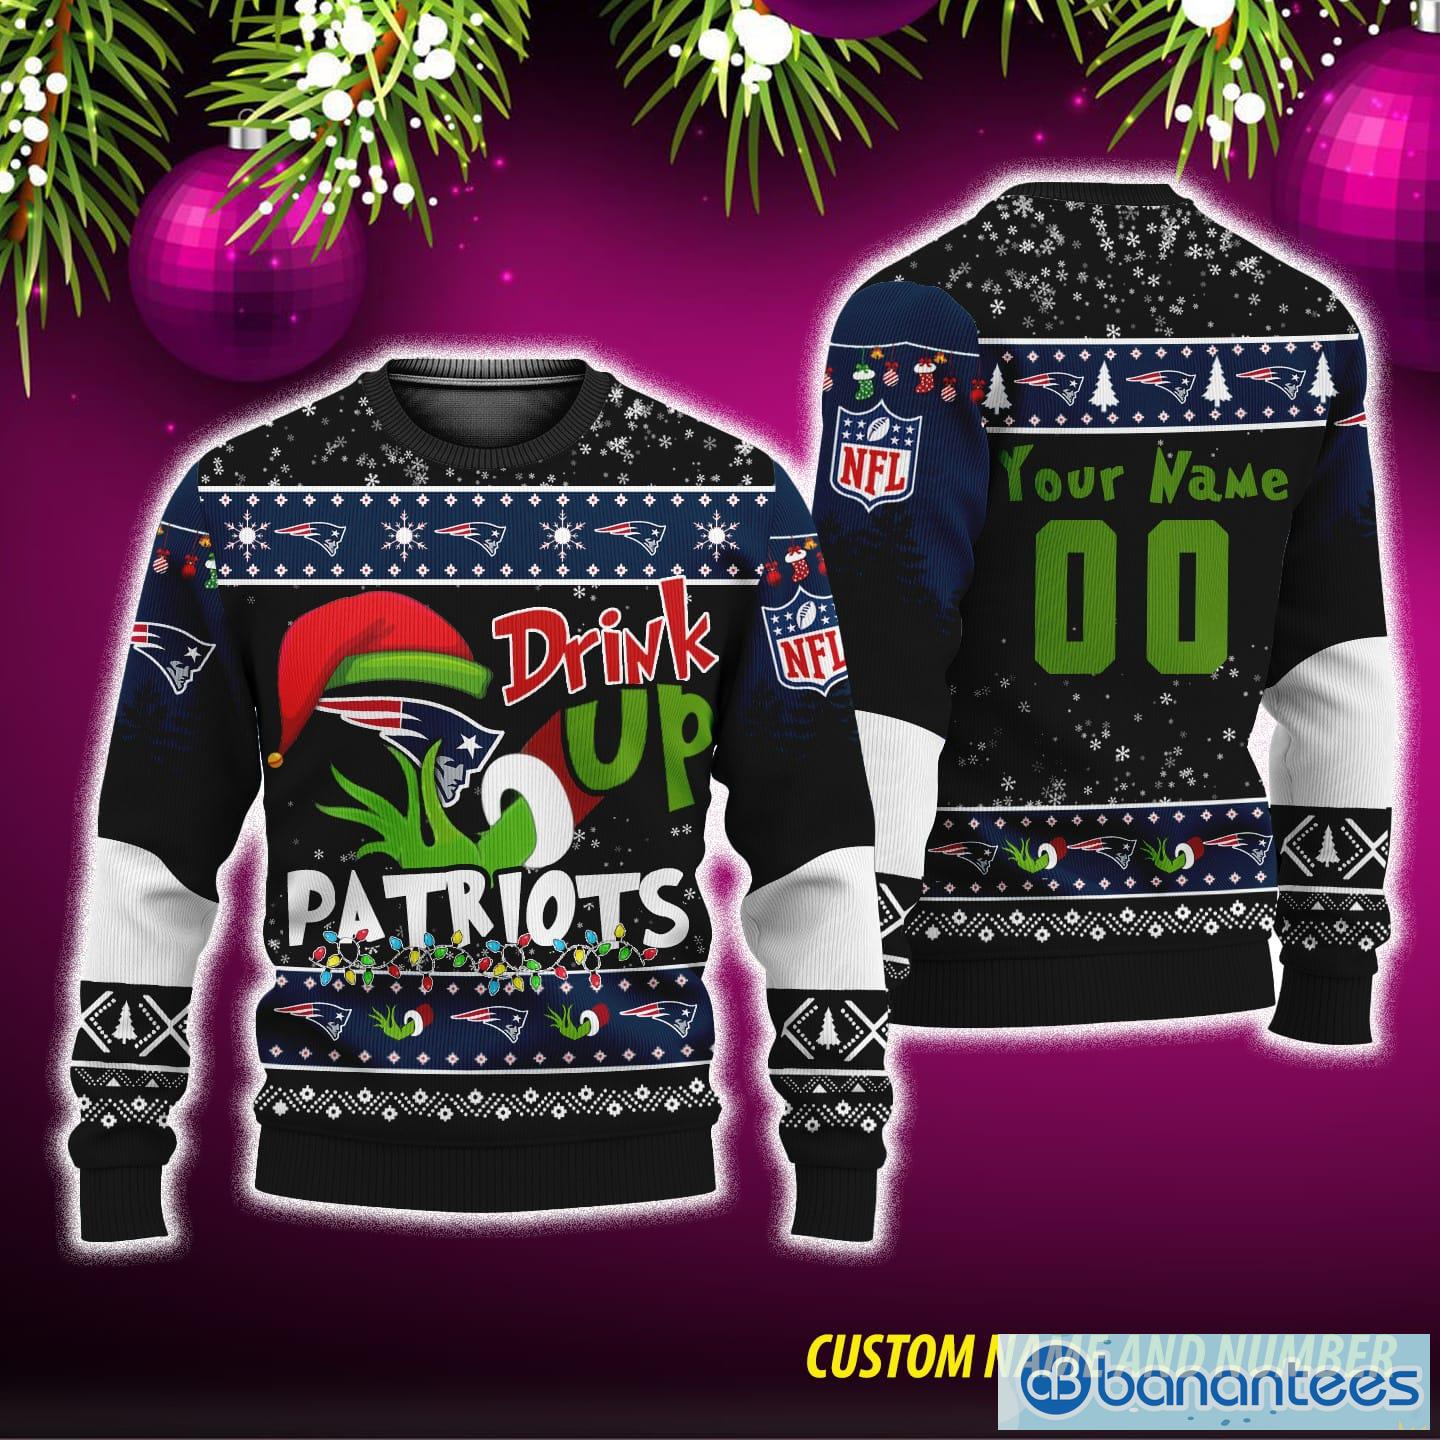 NFL Grinch Drink Up New England Patriots Ugly Christmas Sweater Custom Number And Name - NFL Grinch Drink Up New England Patriots Ugly Christmas Sweater Custom Number And Name